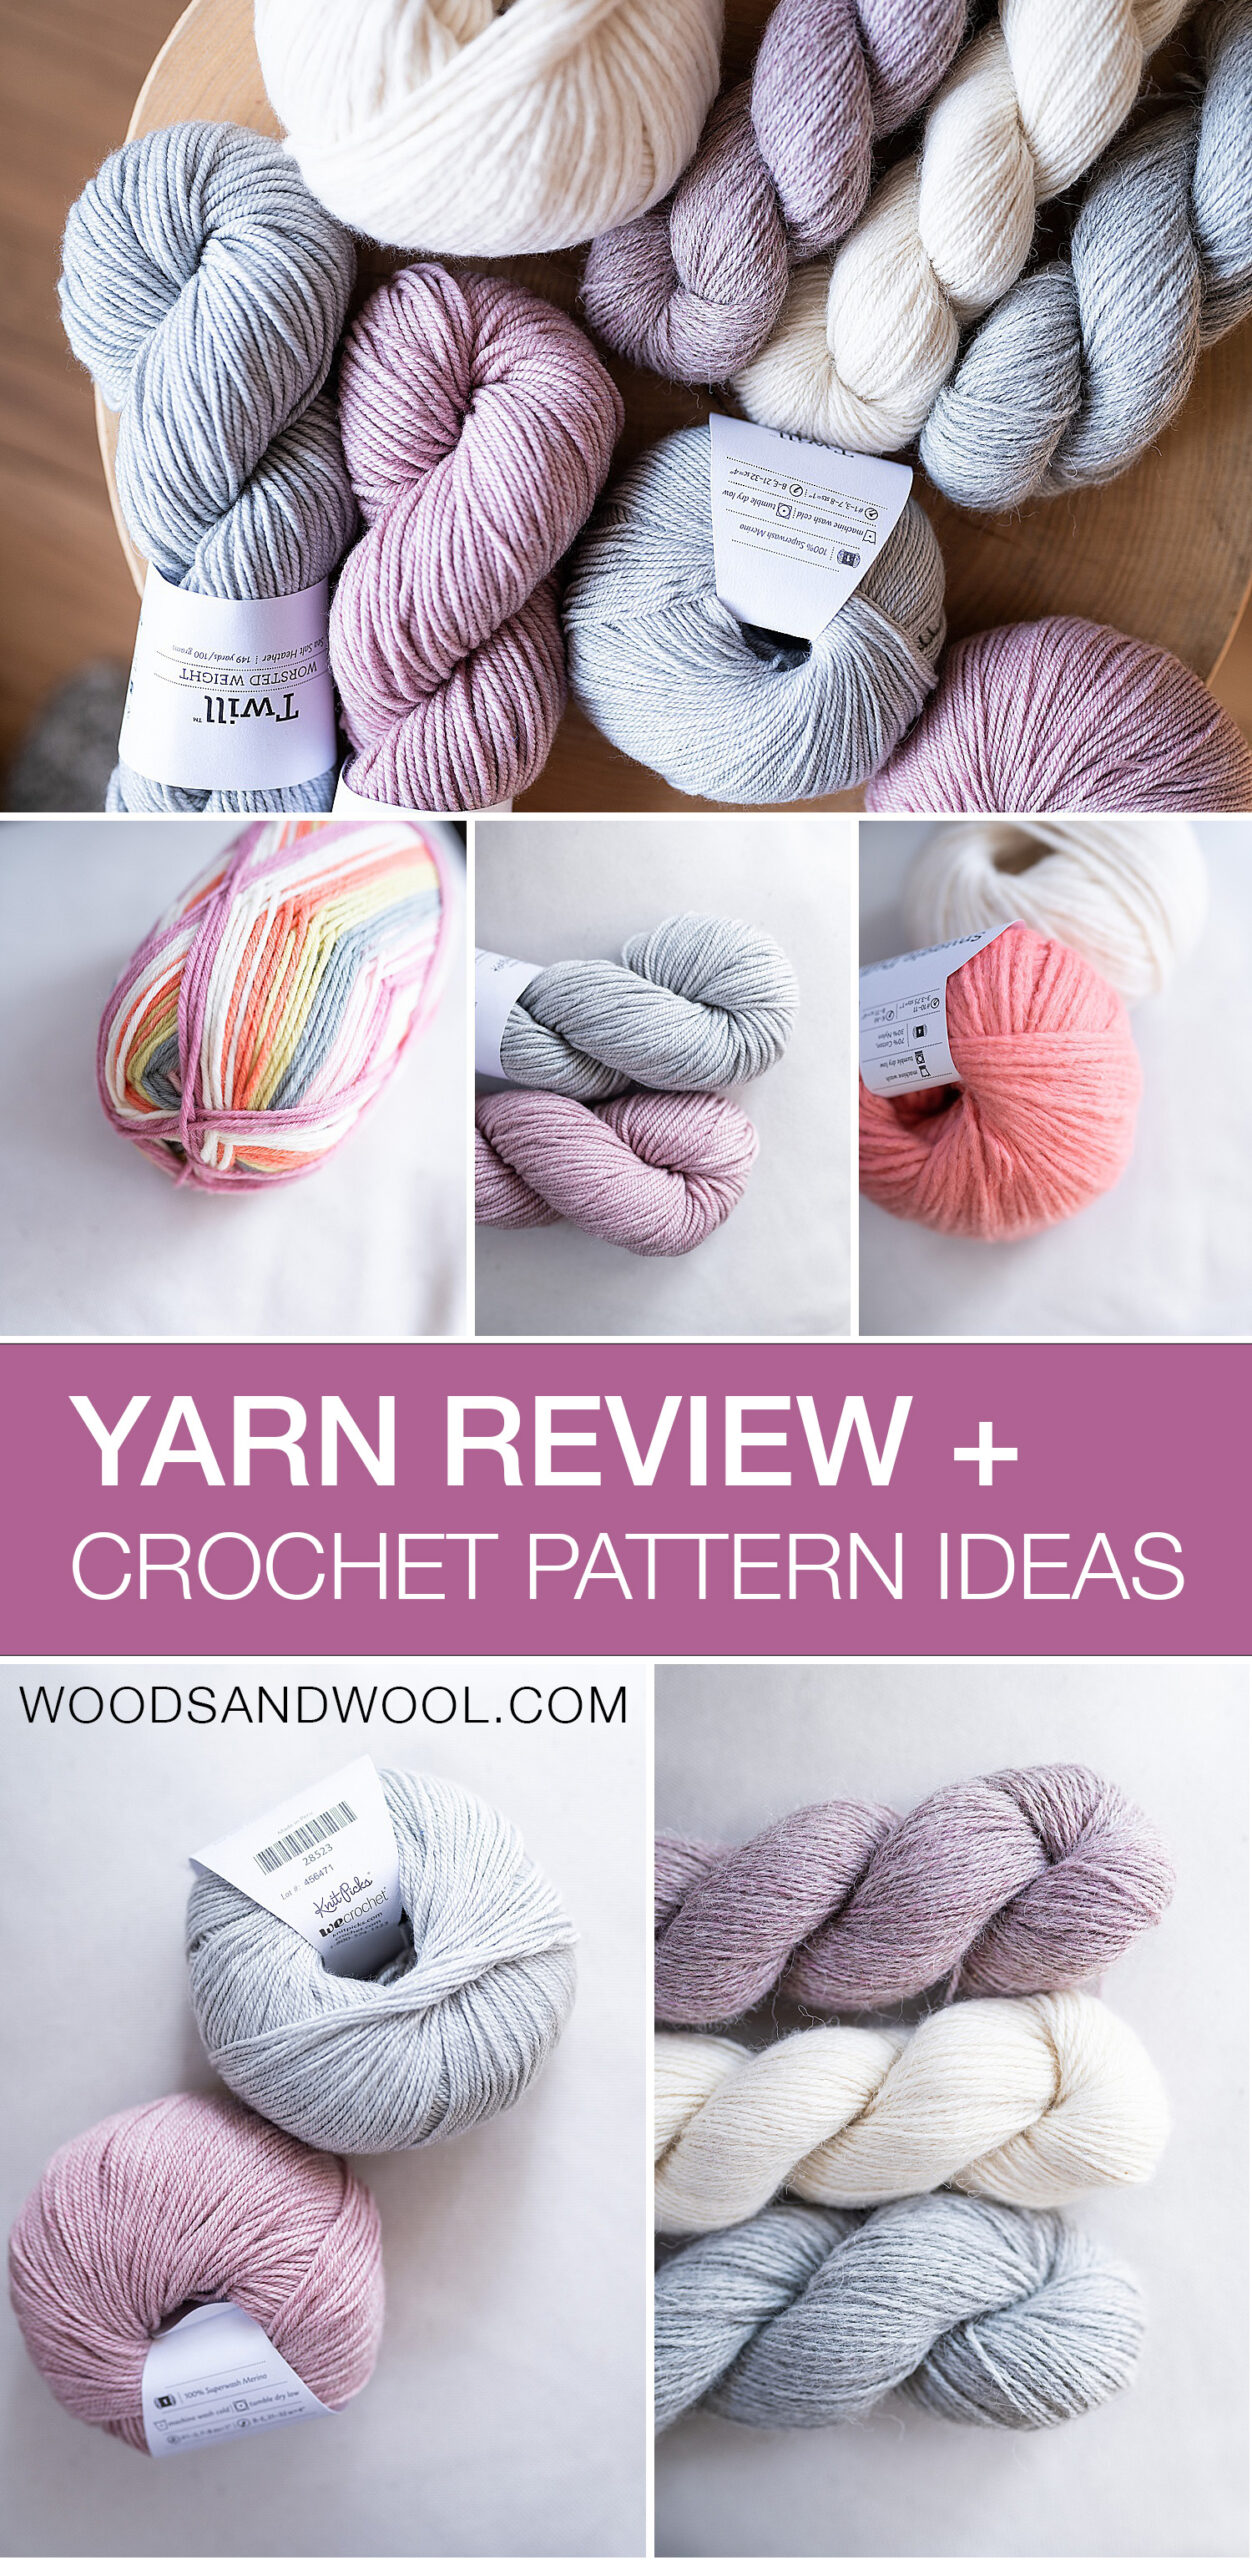 WeCrochet Billow Yarn Review for Crocheters - The Loopy Lamb